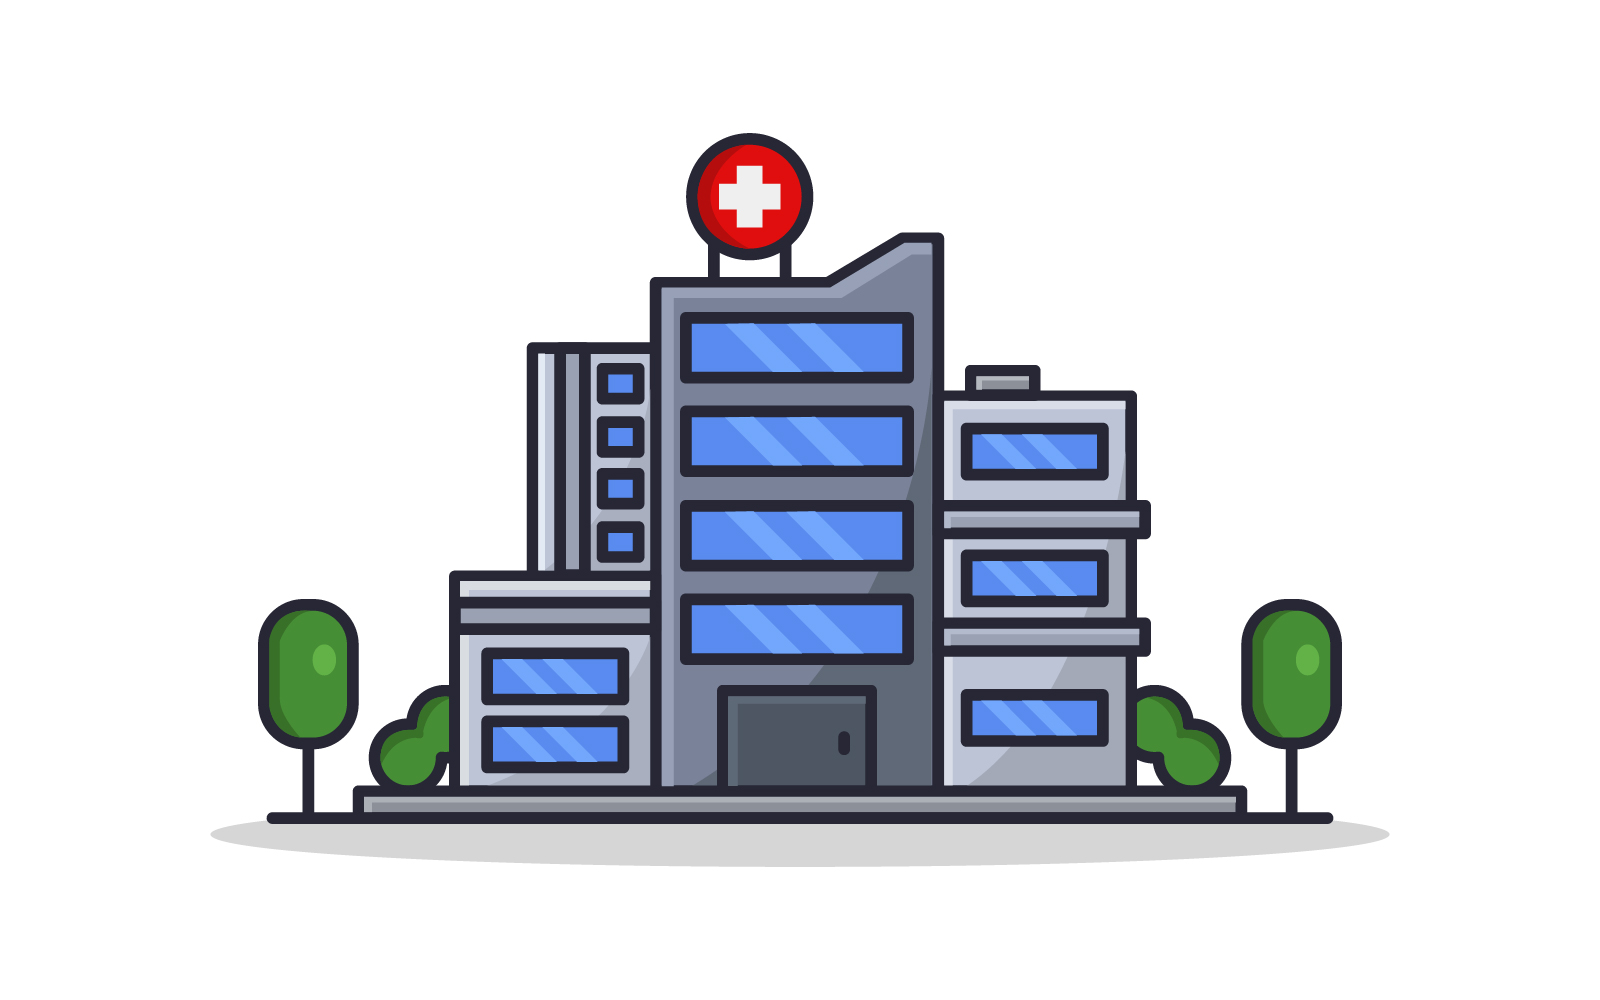 Hospital illustrated in vector